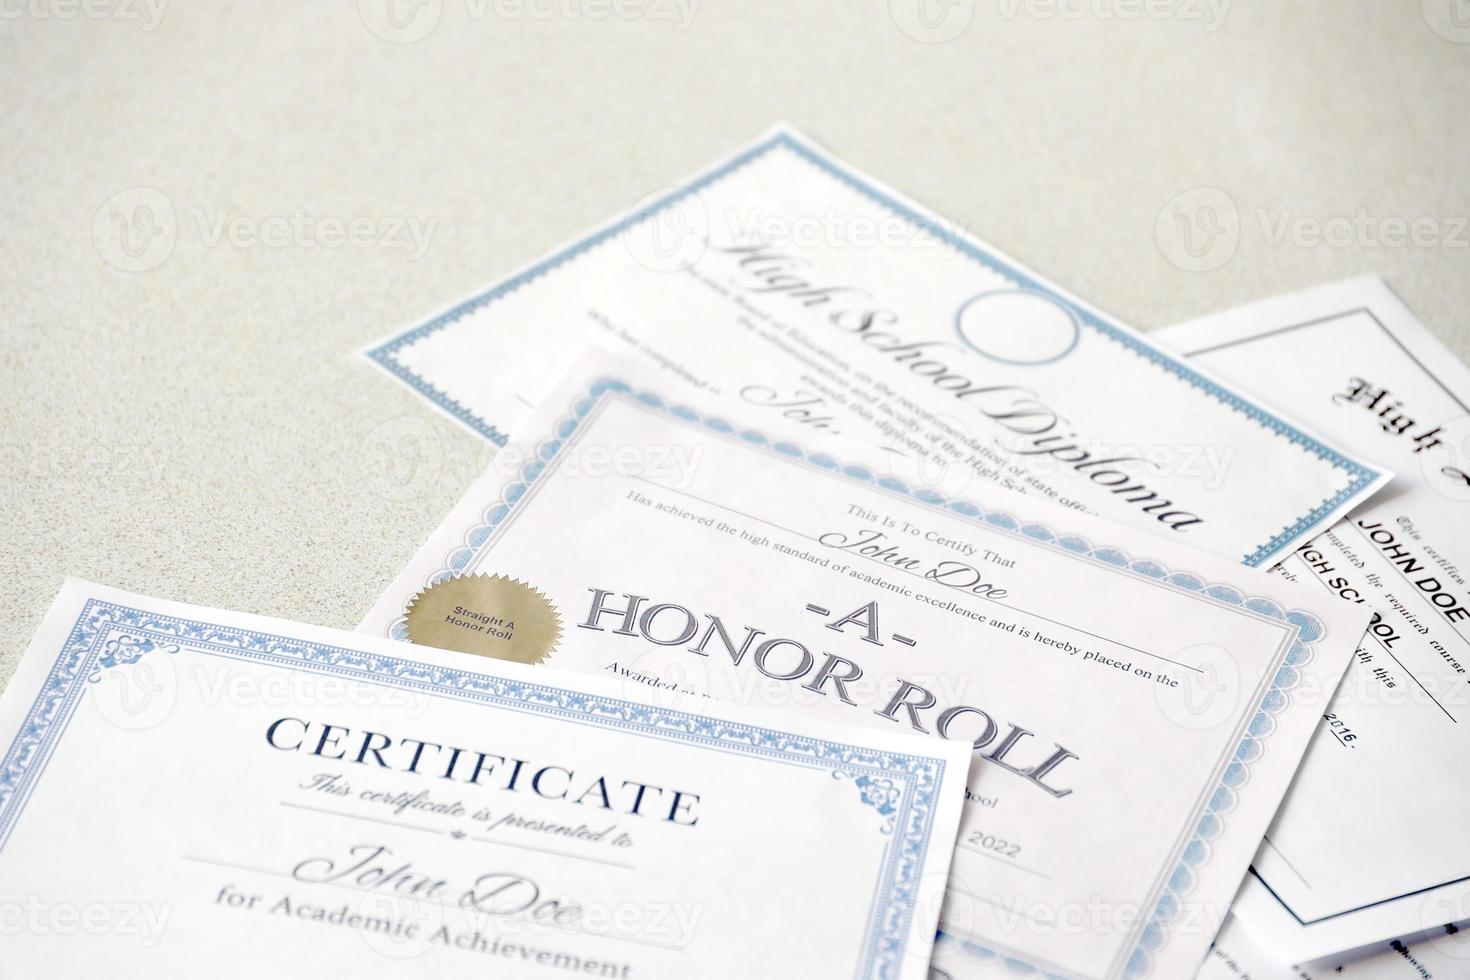 A honor roll recognition, certificate of achievement and high school diploma lies on table. Education documents photo